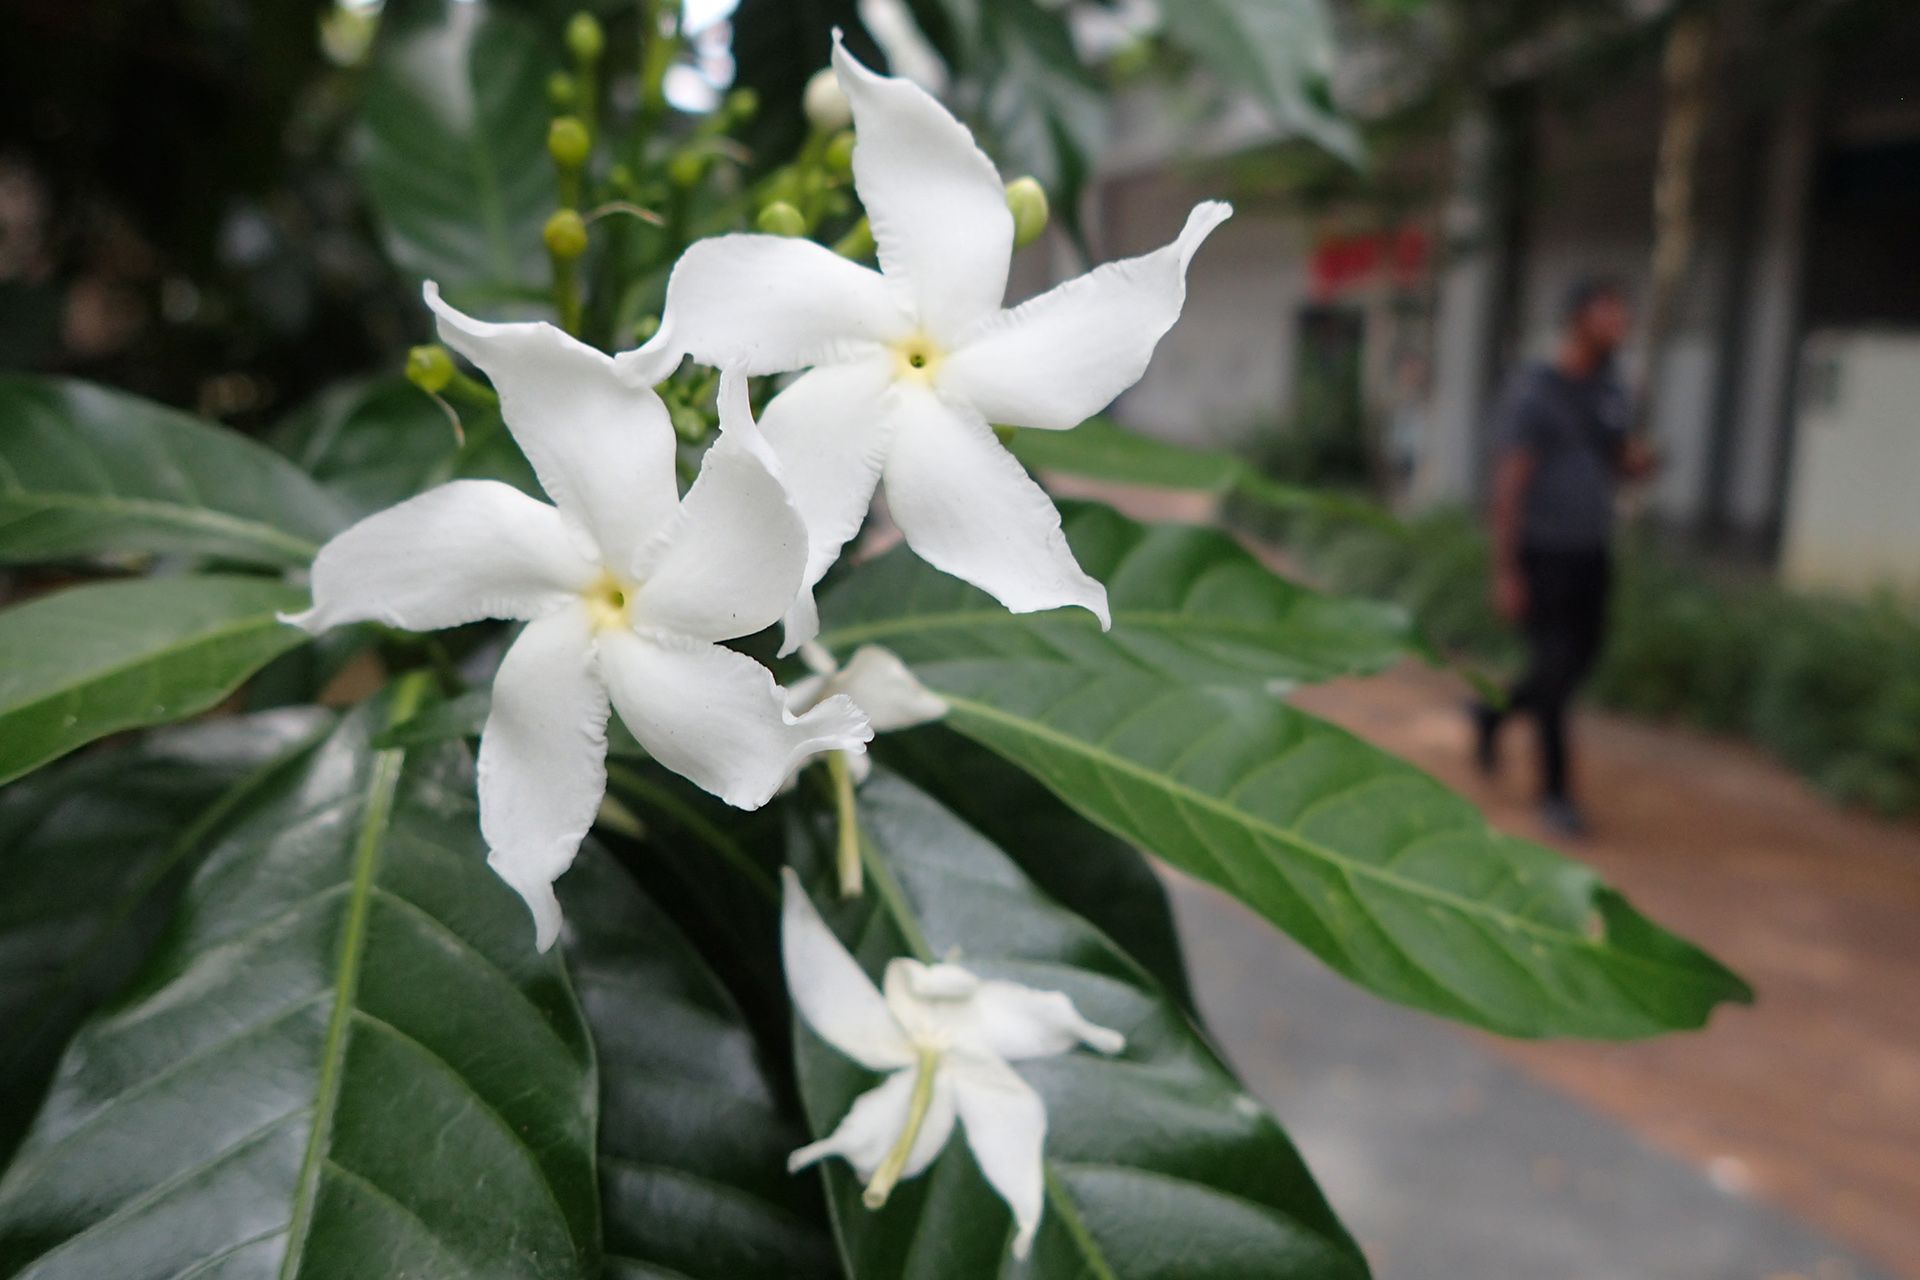 A pinwheel flower shrub in bloom along New Upper Changi Road, near Bedok Mall on March 1. ST PHOTO: NEO XIAOBIN